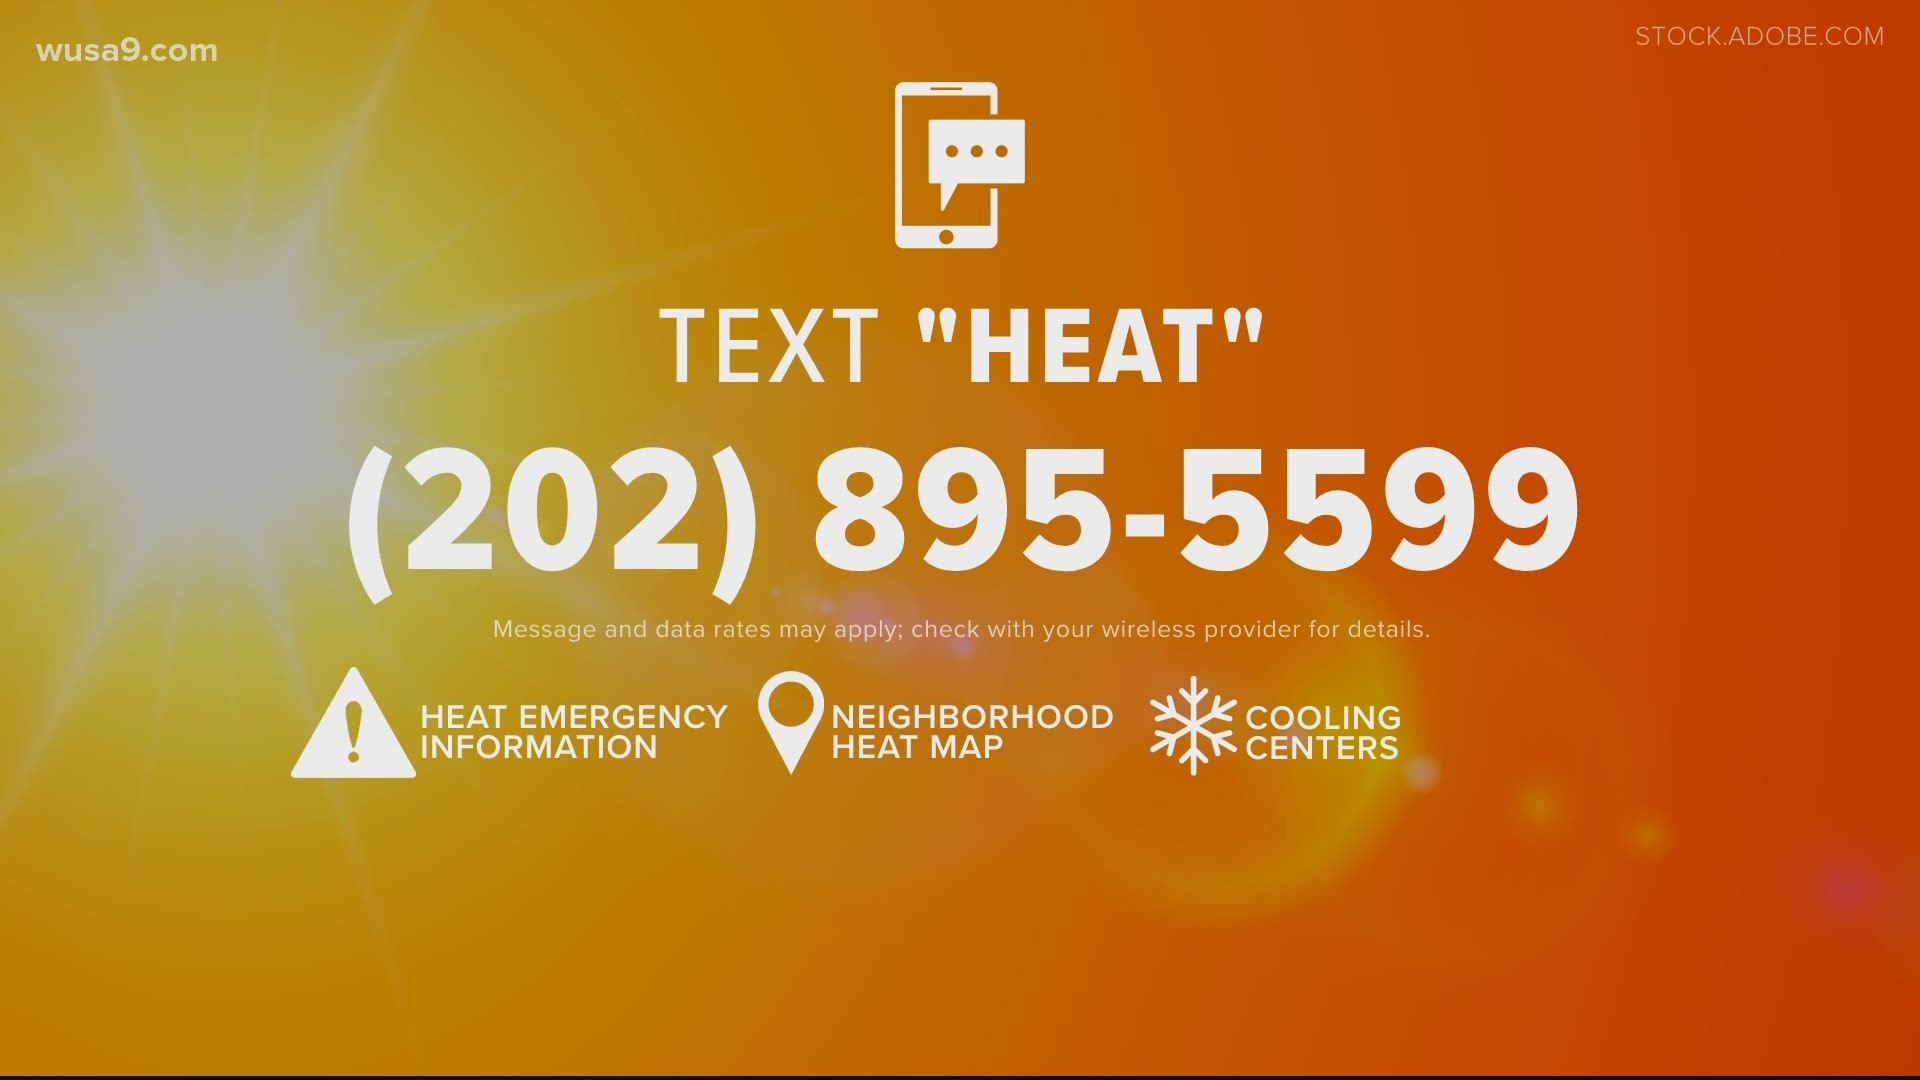 D.C. has activated a Heat Emergency for Tuesday, July 6 and Wednesday, July 7, 2021, due to expected high temperatures in the city, according to Mayor Bowser.